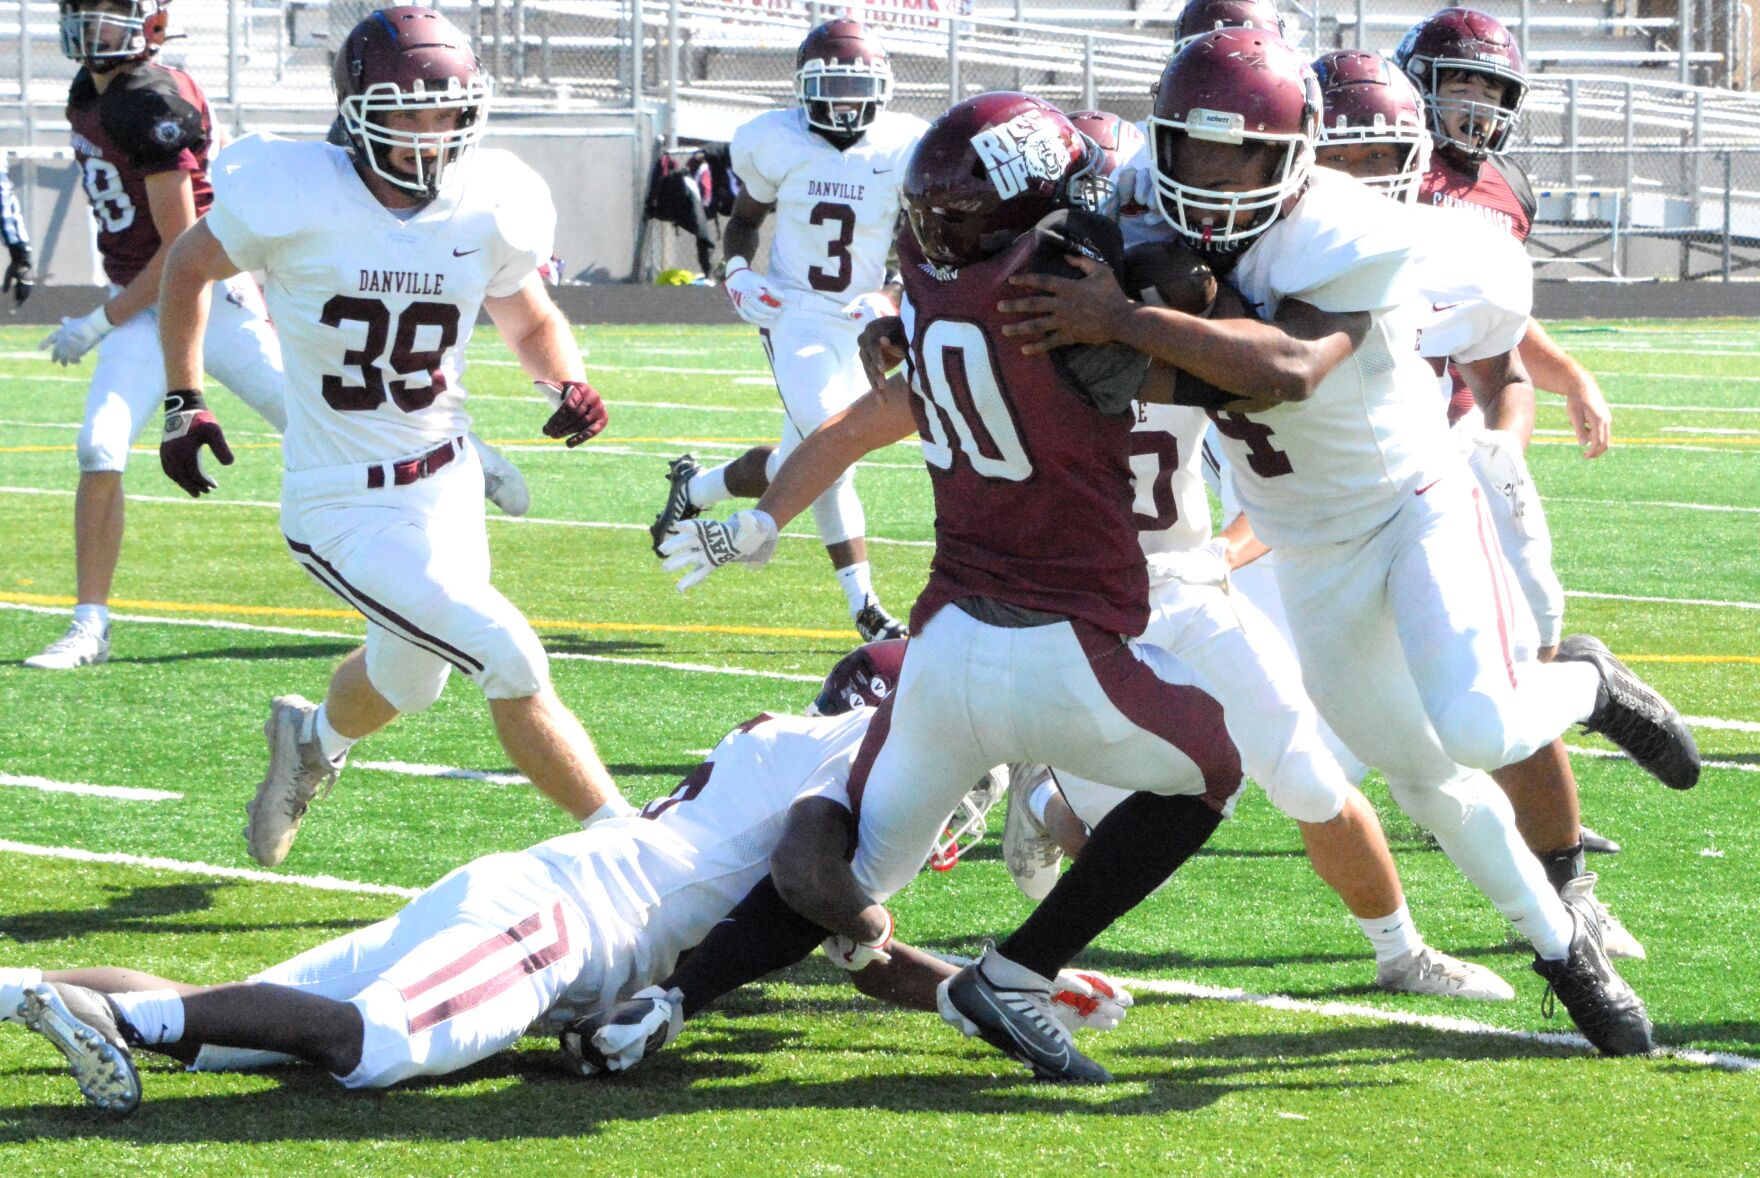 Danville football team seeks crucial victory against Peoria Richwoods to preserve playoff aspirations